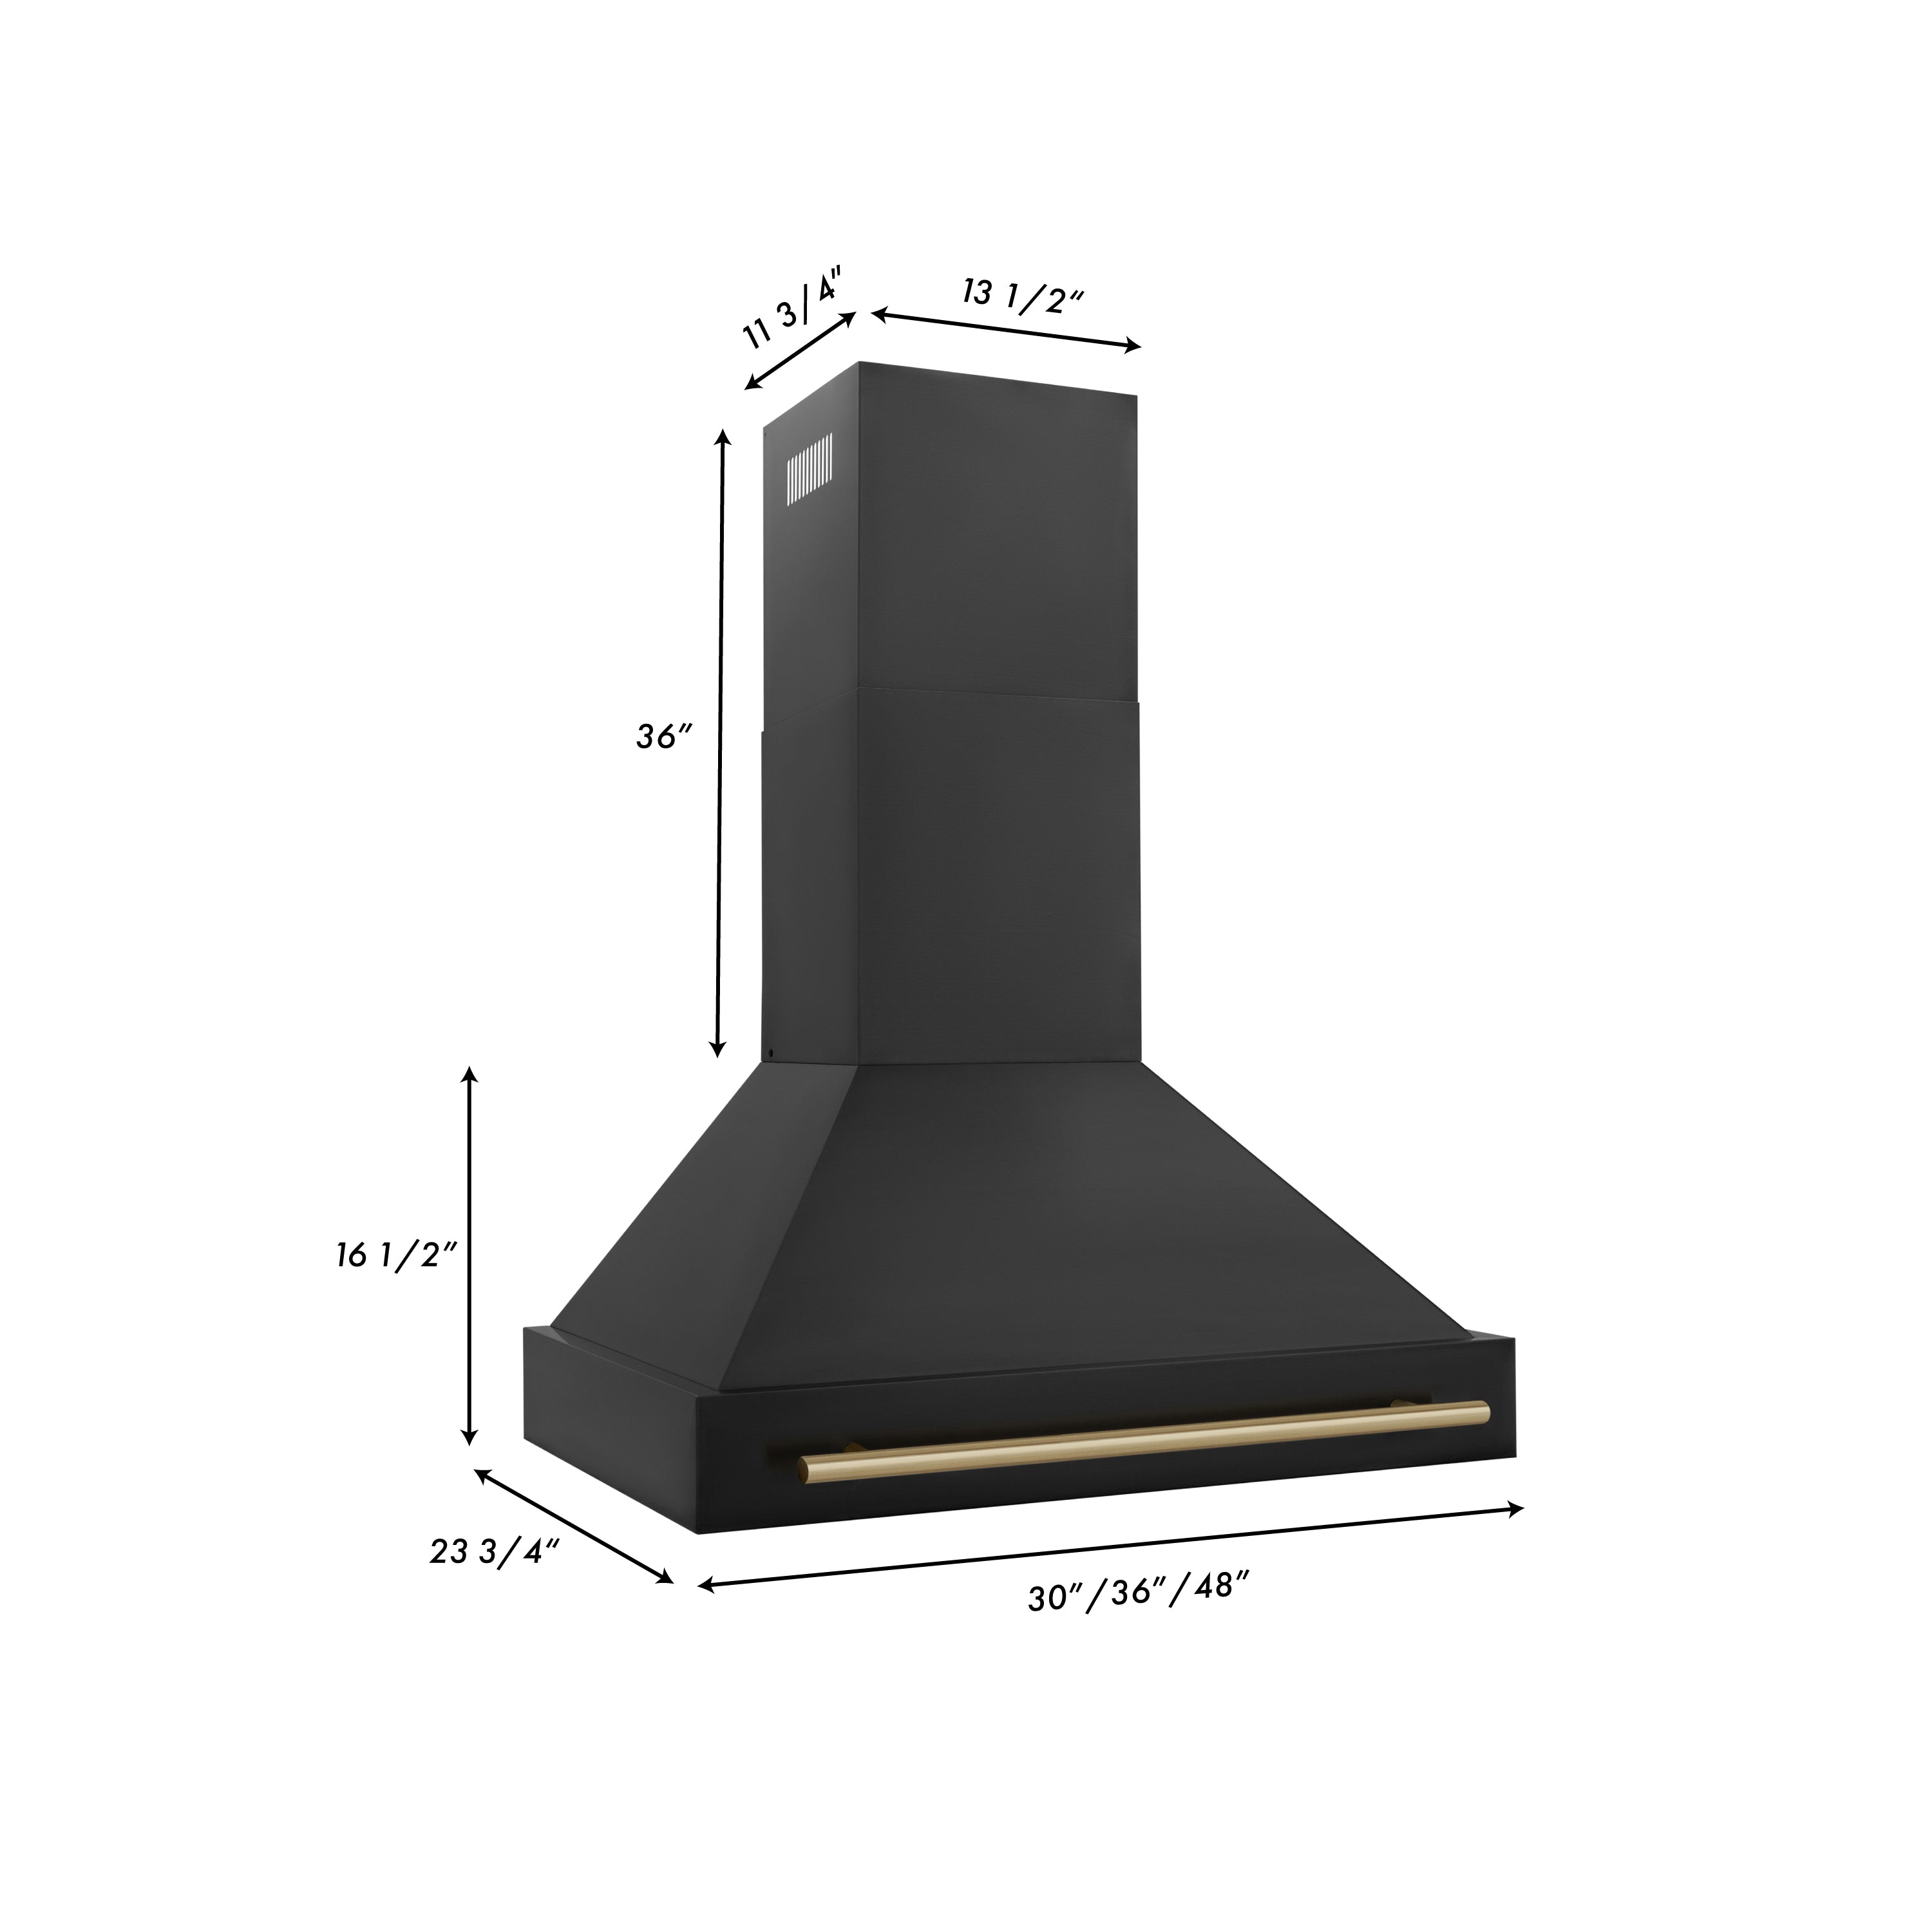 ZLINE Autograph Edition 36 in. Kitchen Package with Black Stainless Steel Dual Fuel Range, Range Hood and Dishwasher with Champagne Bronze Accents (3AKP-RABRHDWV36-CB) dimensional diagram with measurements.